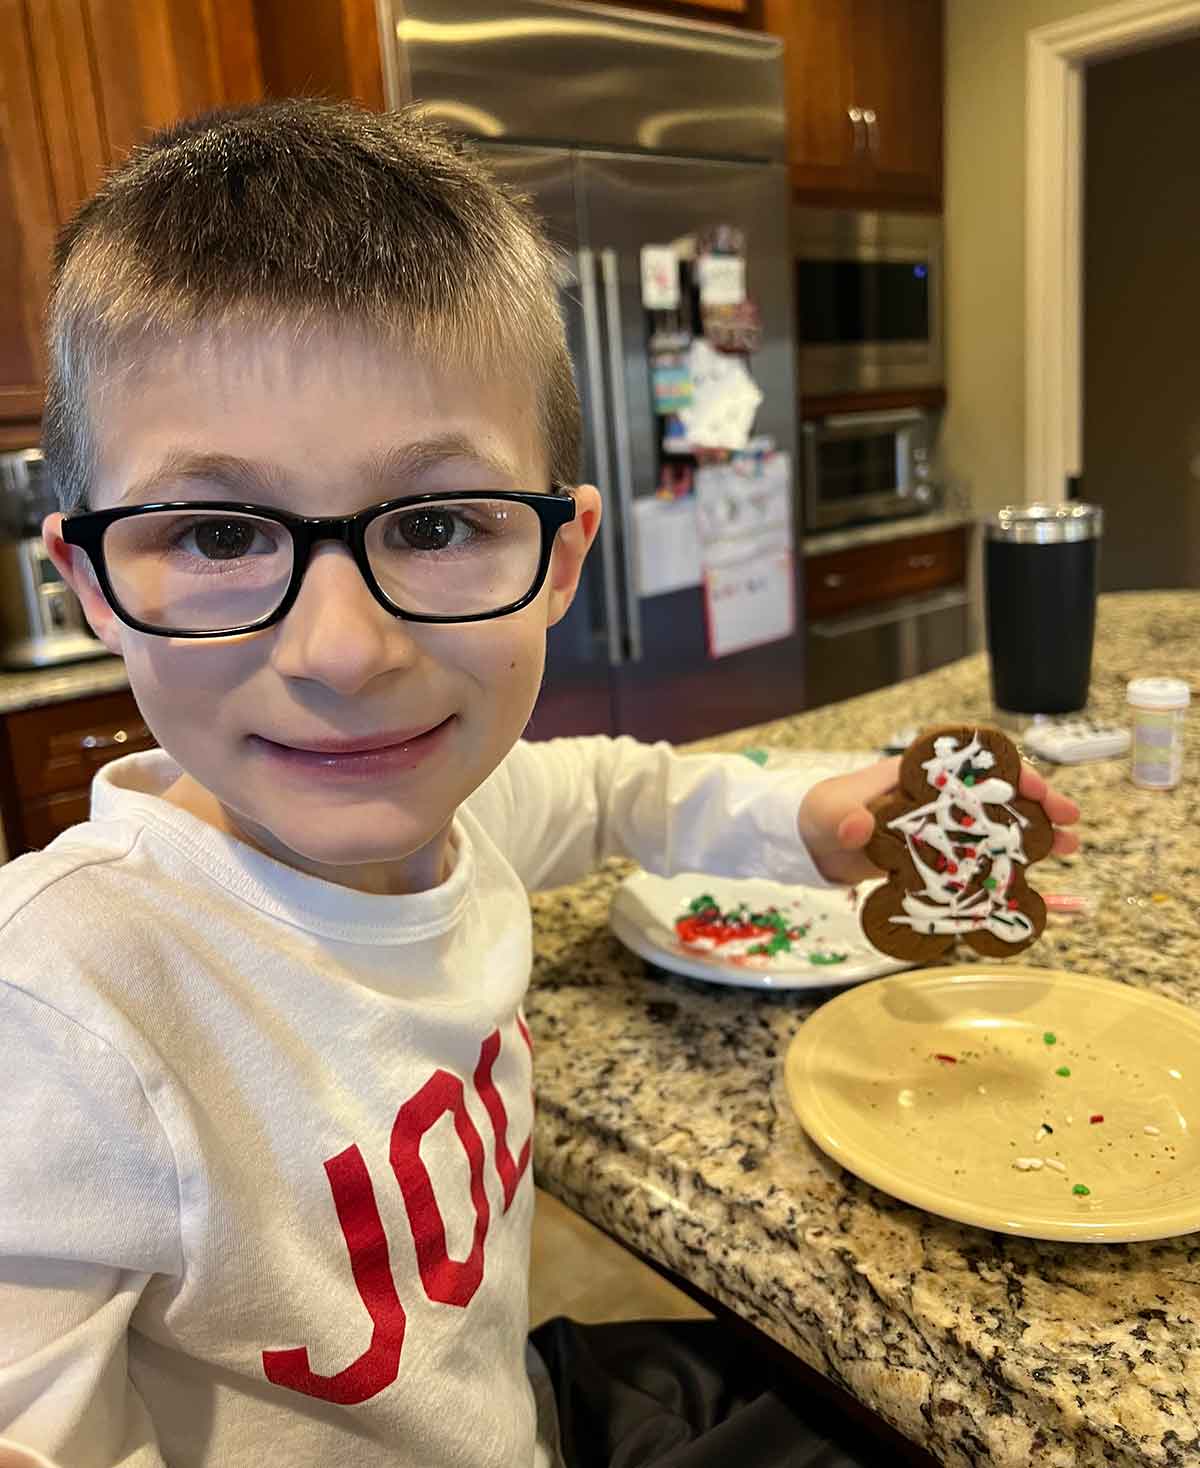 Little boy sitting at a counter holding a decorated gingerbread man cookie.